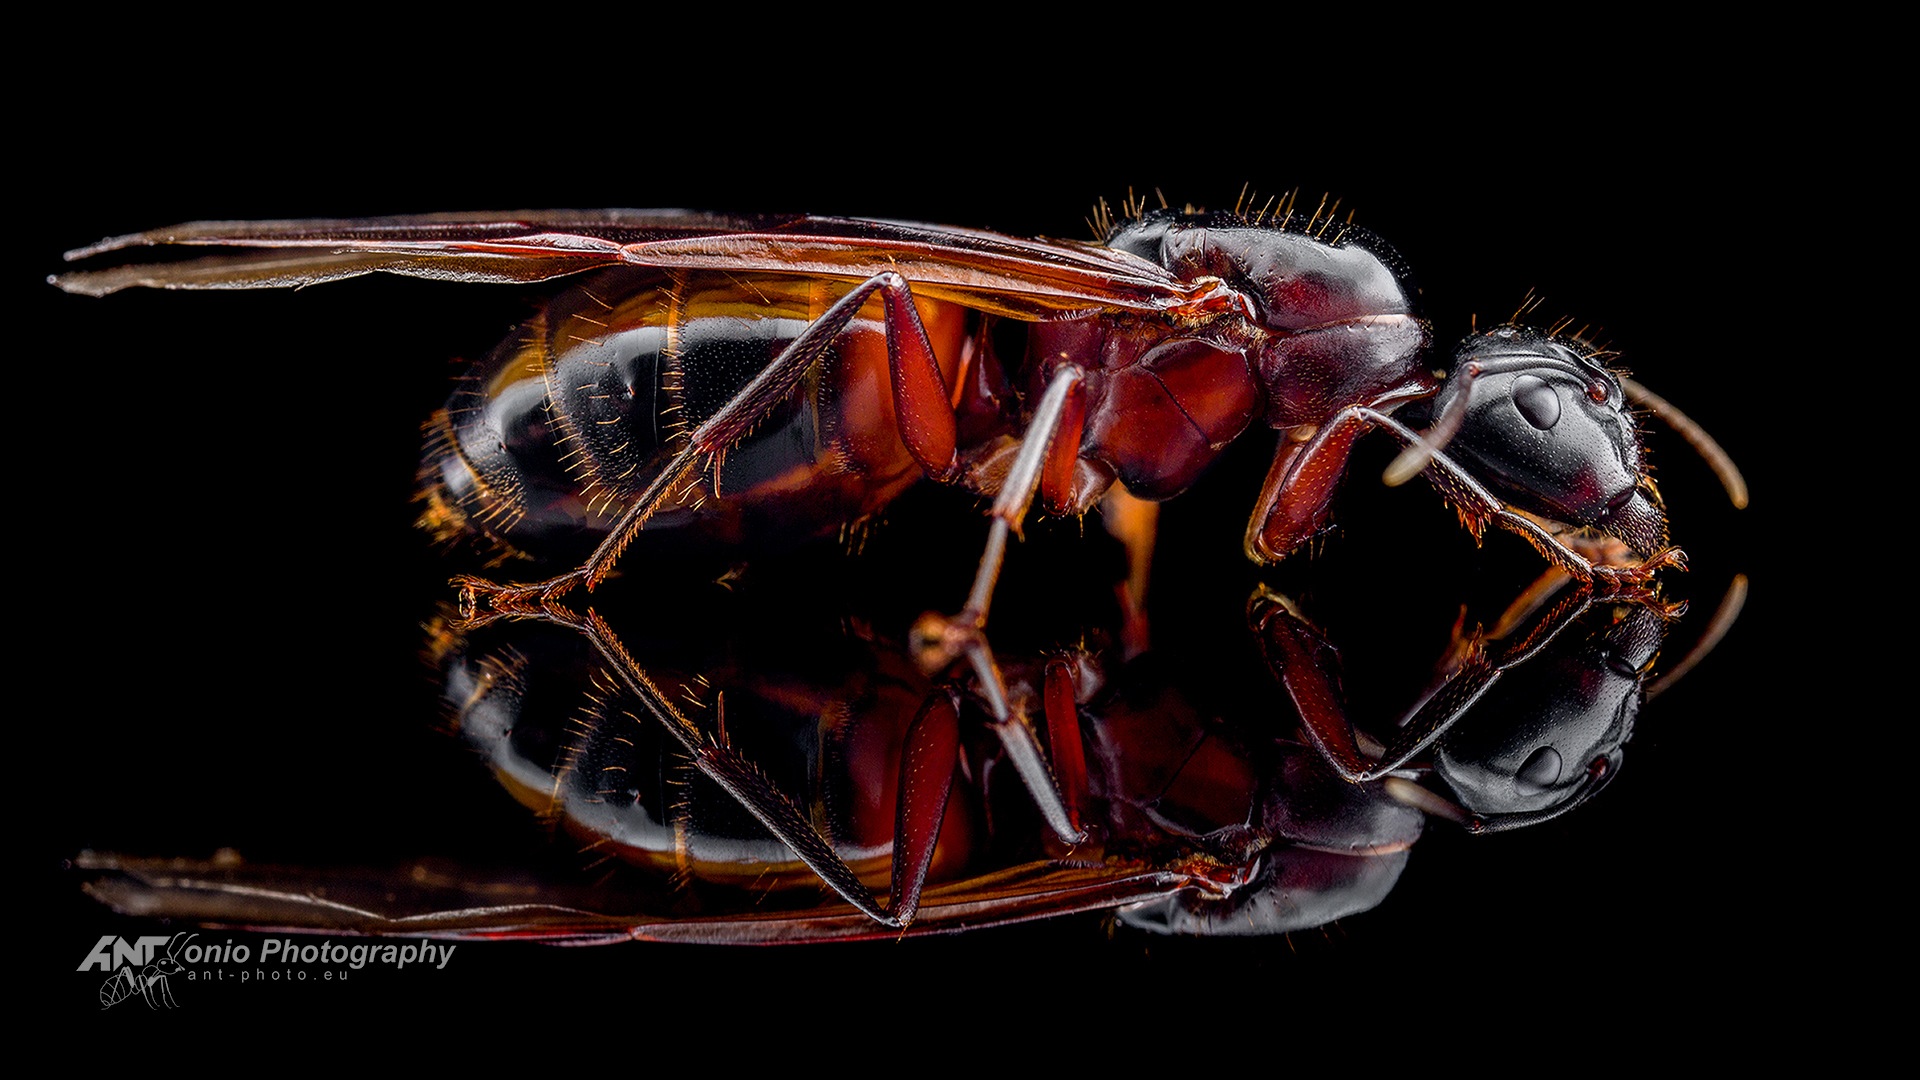 winged queen Camponotus ligniperda on black background with mirror image in side view